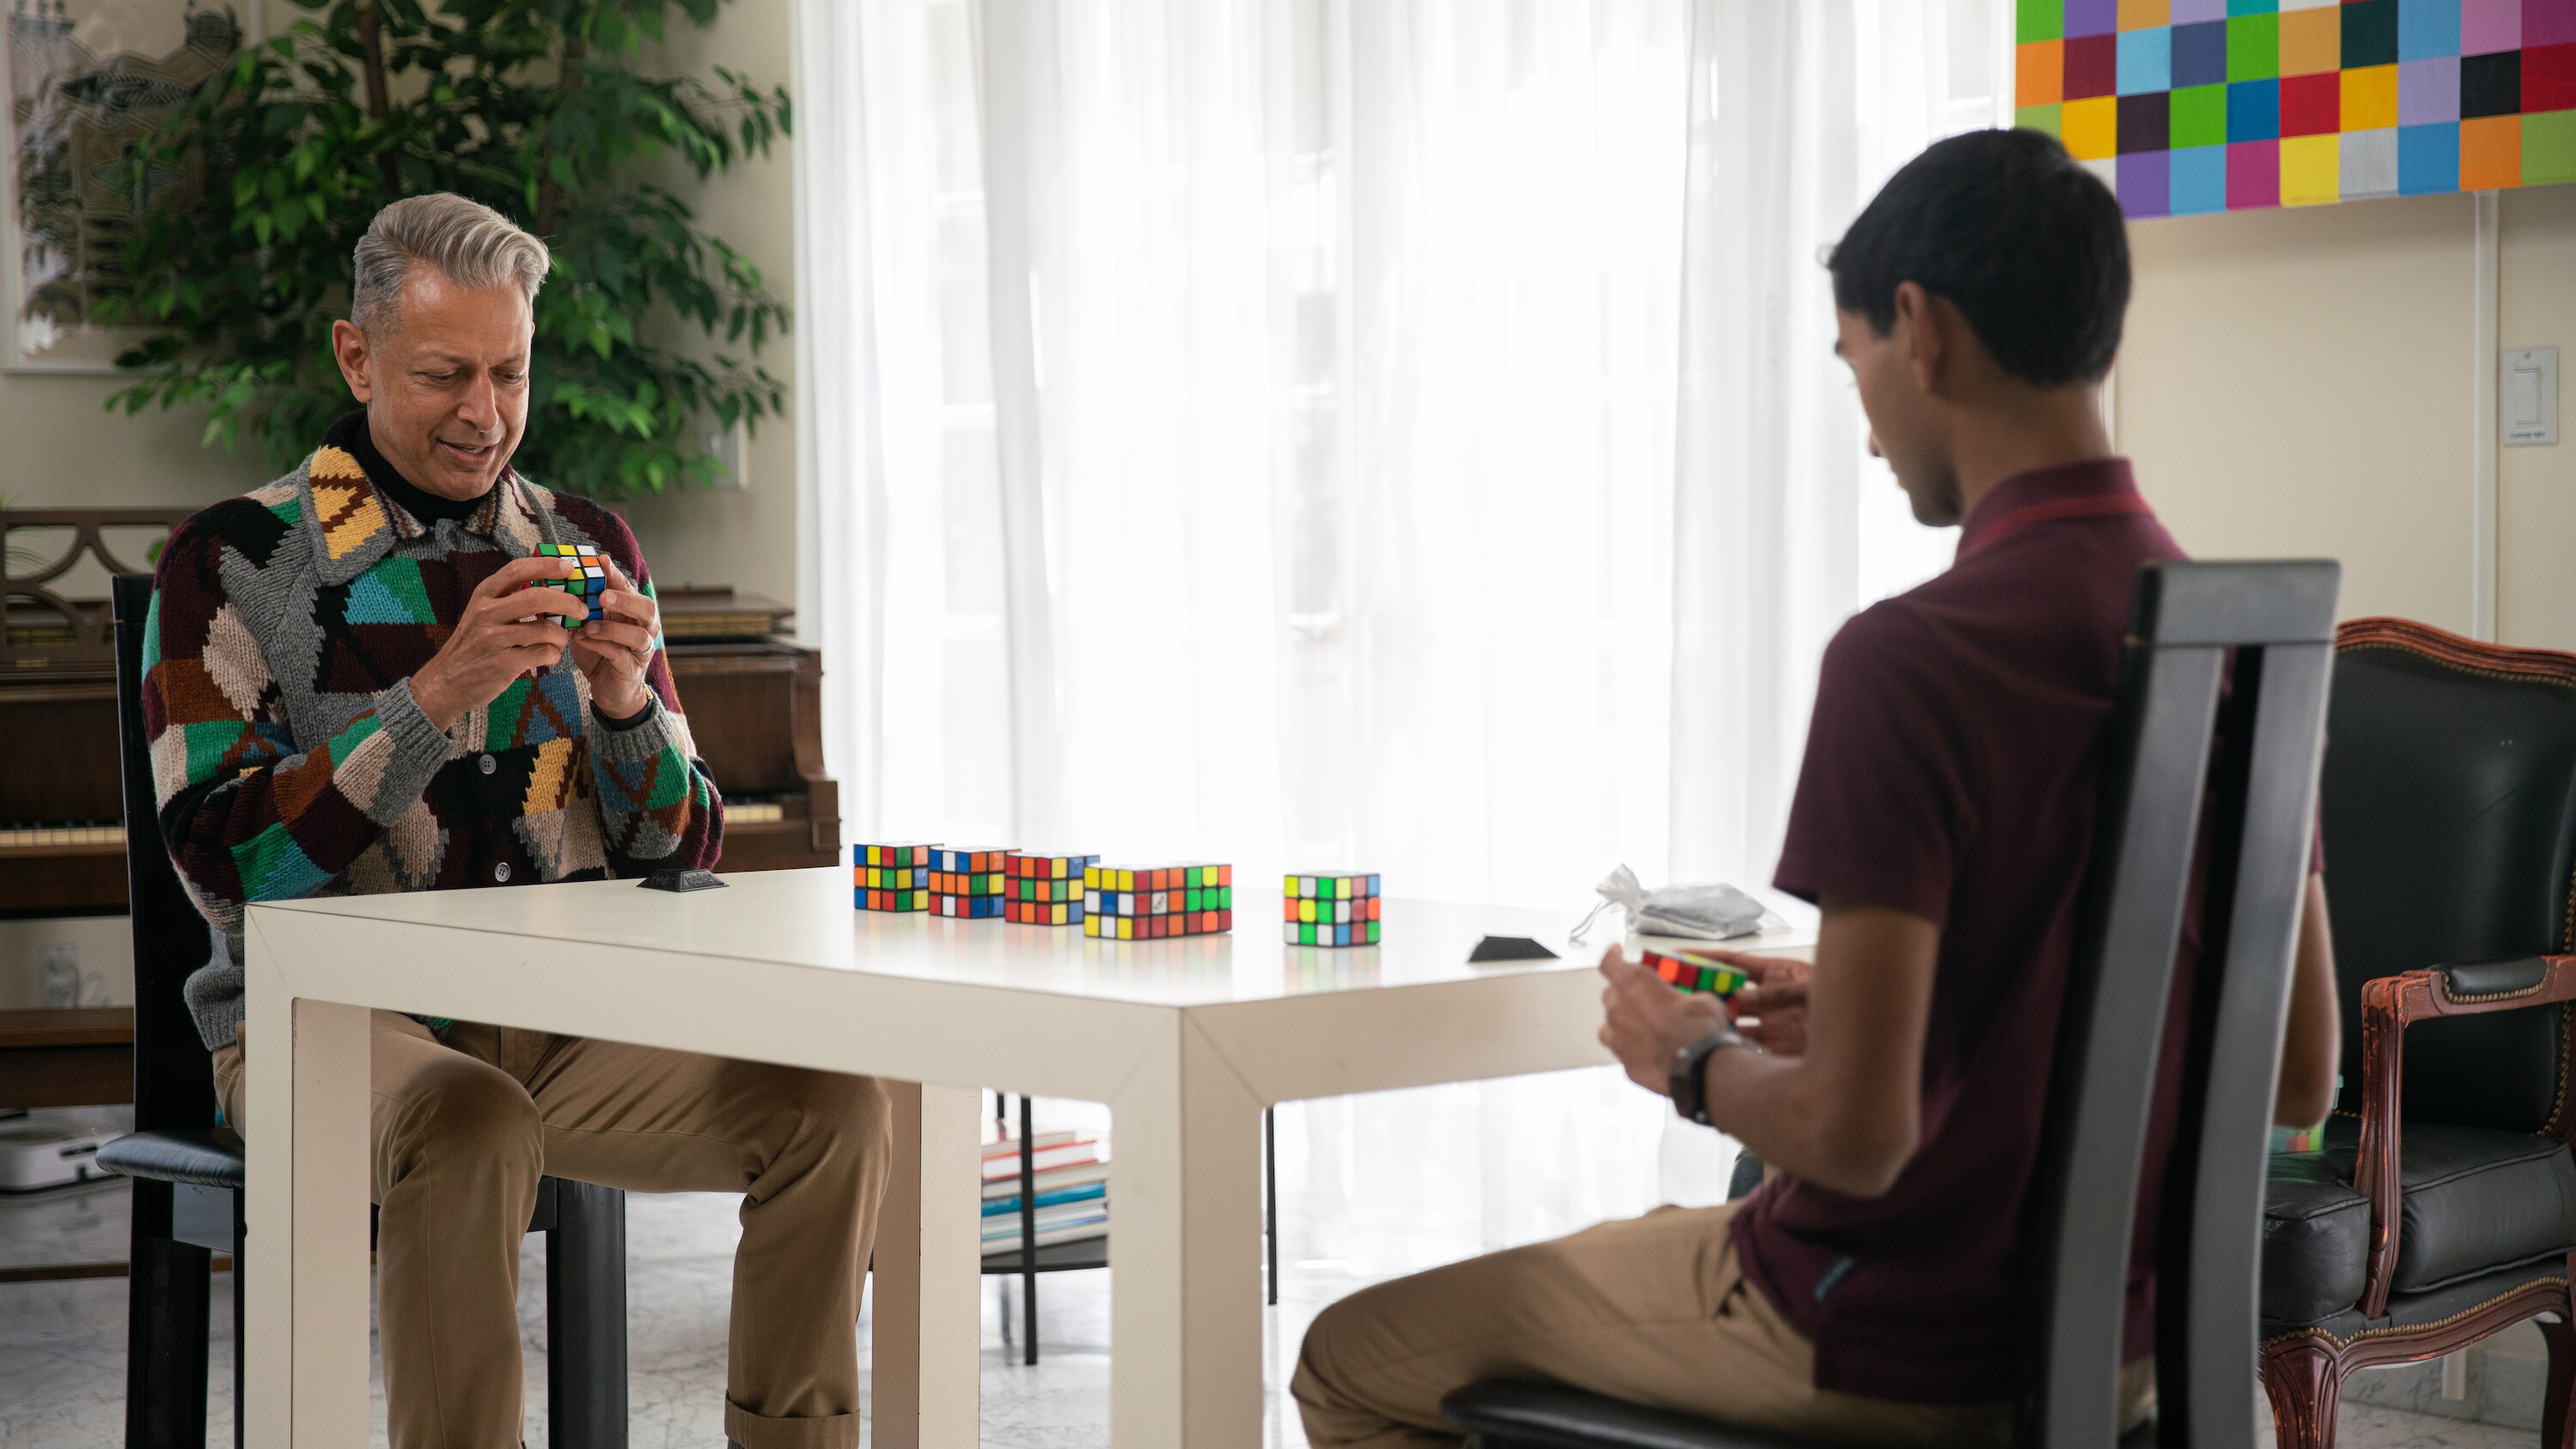 Los Angeles, CA - Jeff Goldblum (L) opposite Rubik's Cube master and several Rubik's Cubes. (Credit: National Geographic)